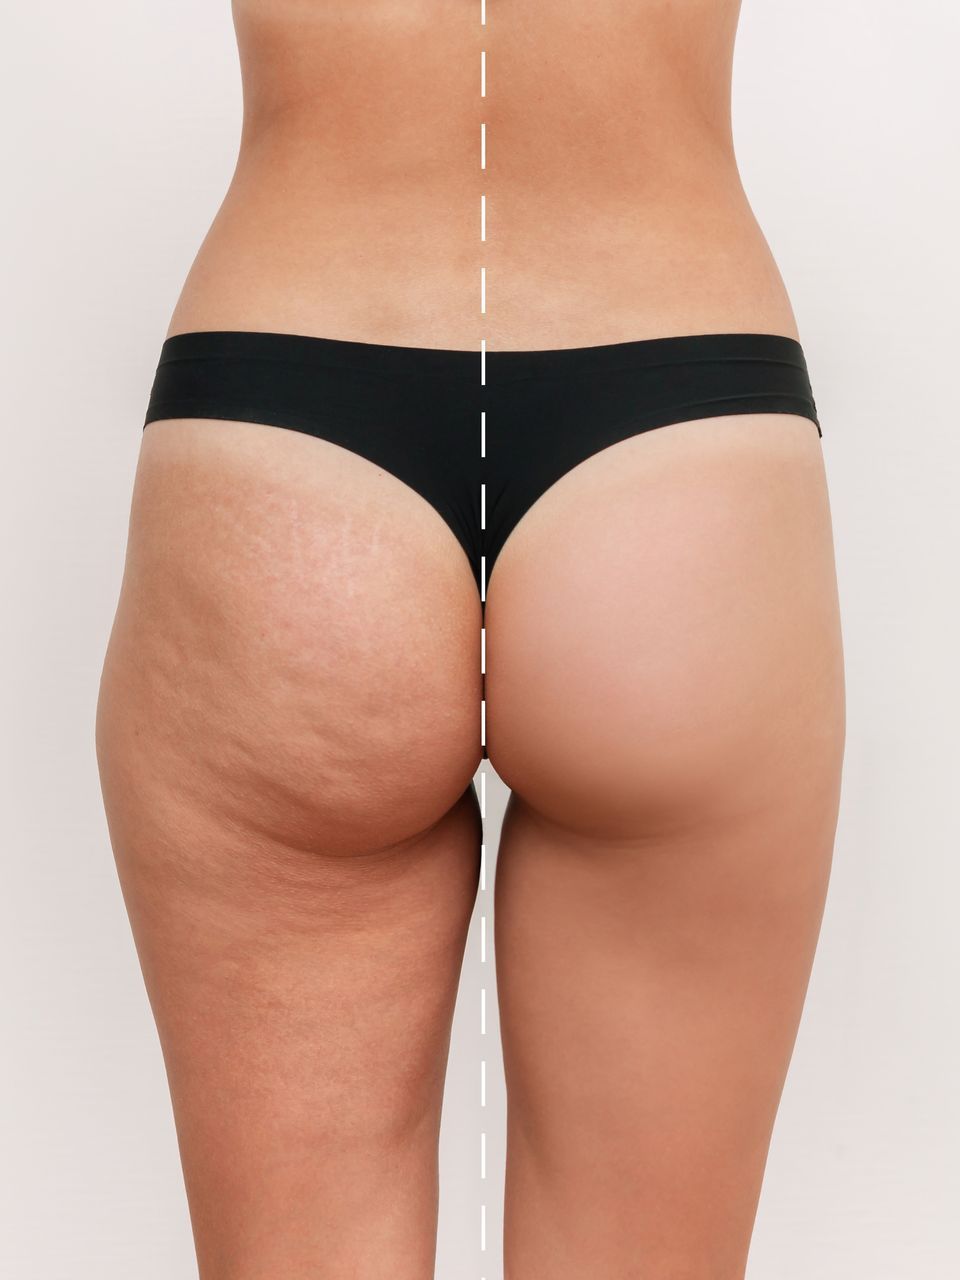 Cellulite Removal Treatment